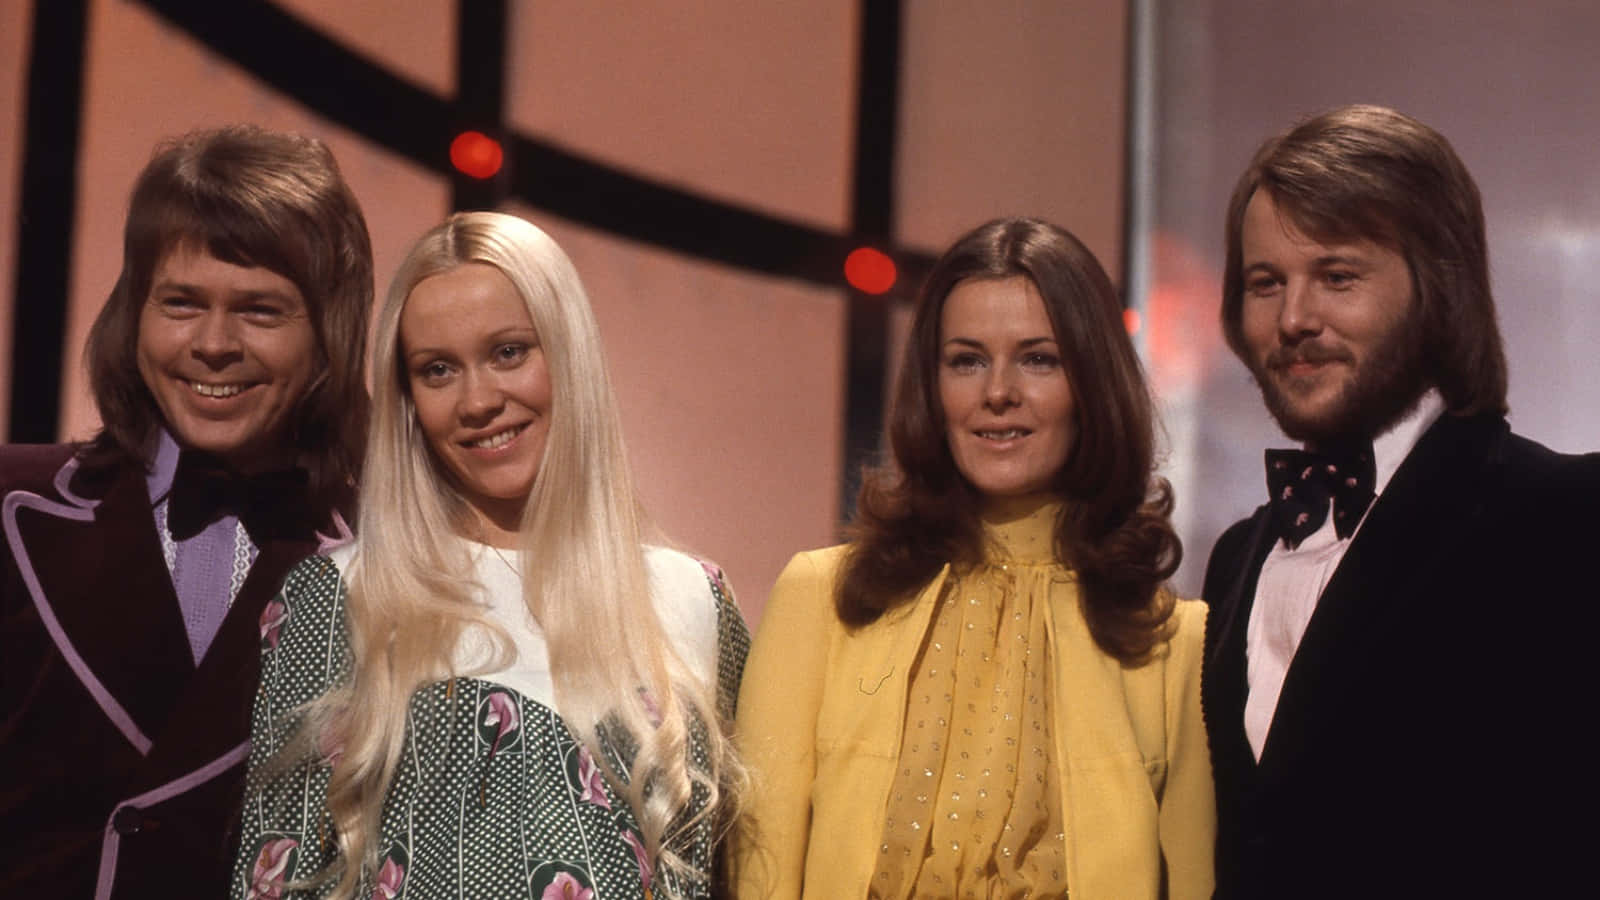 Iconic Music Group ABBA